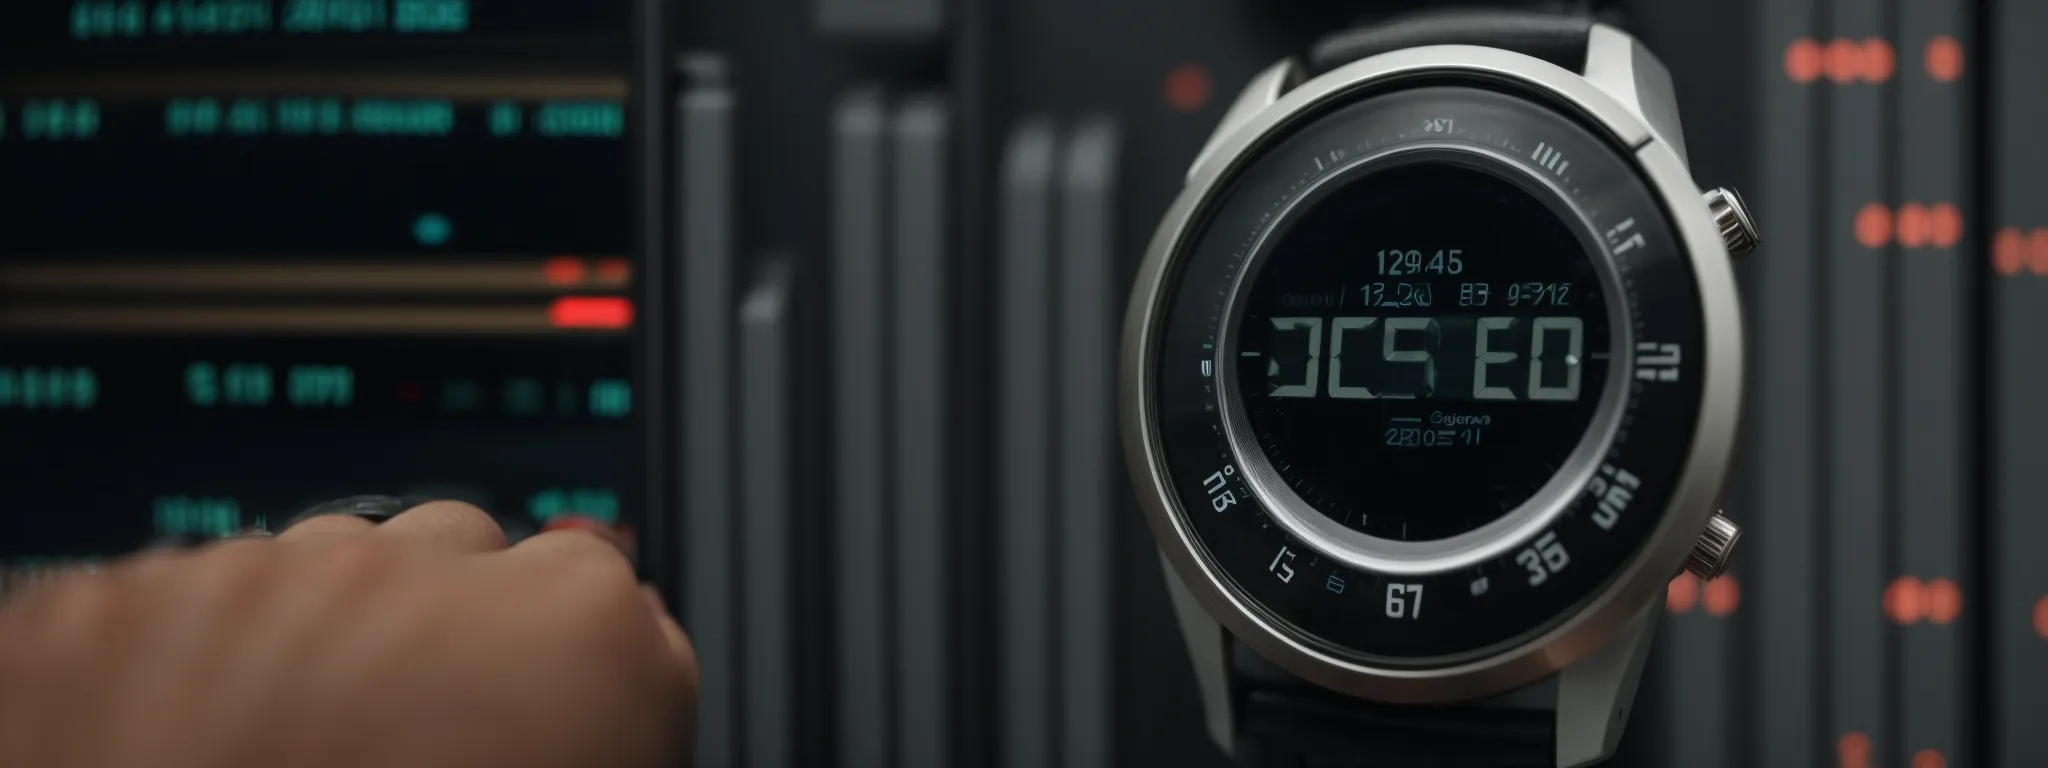 a close-up of a stopwatch in a person's hand against a background of blurred server racks highlights the pursuit of website speed optimization and performance assessment.